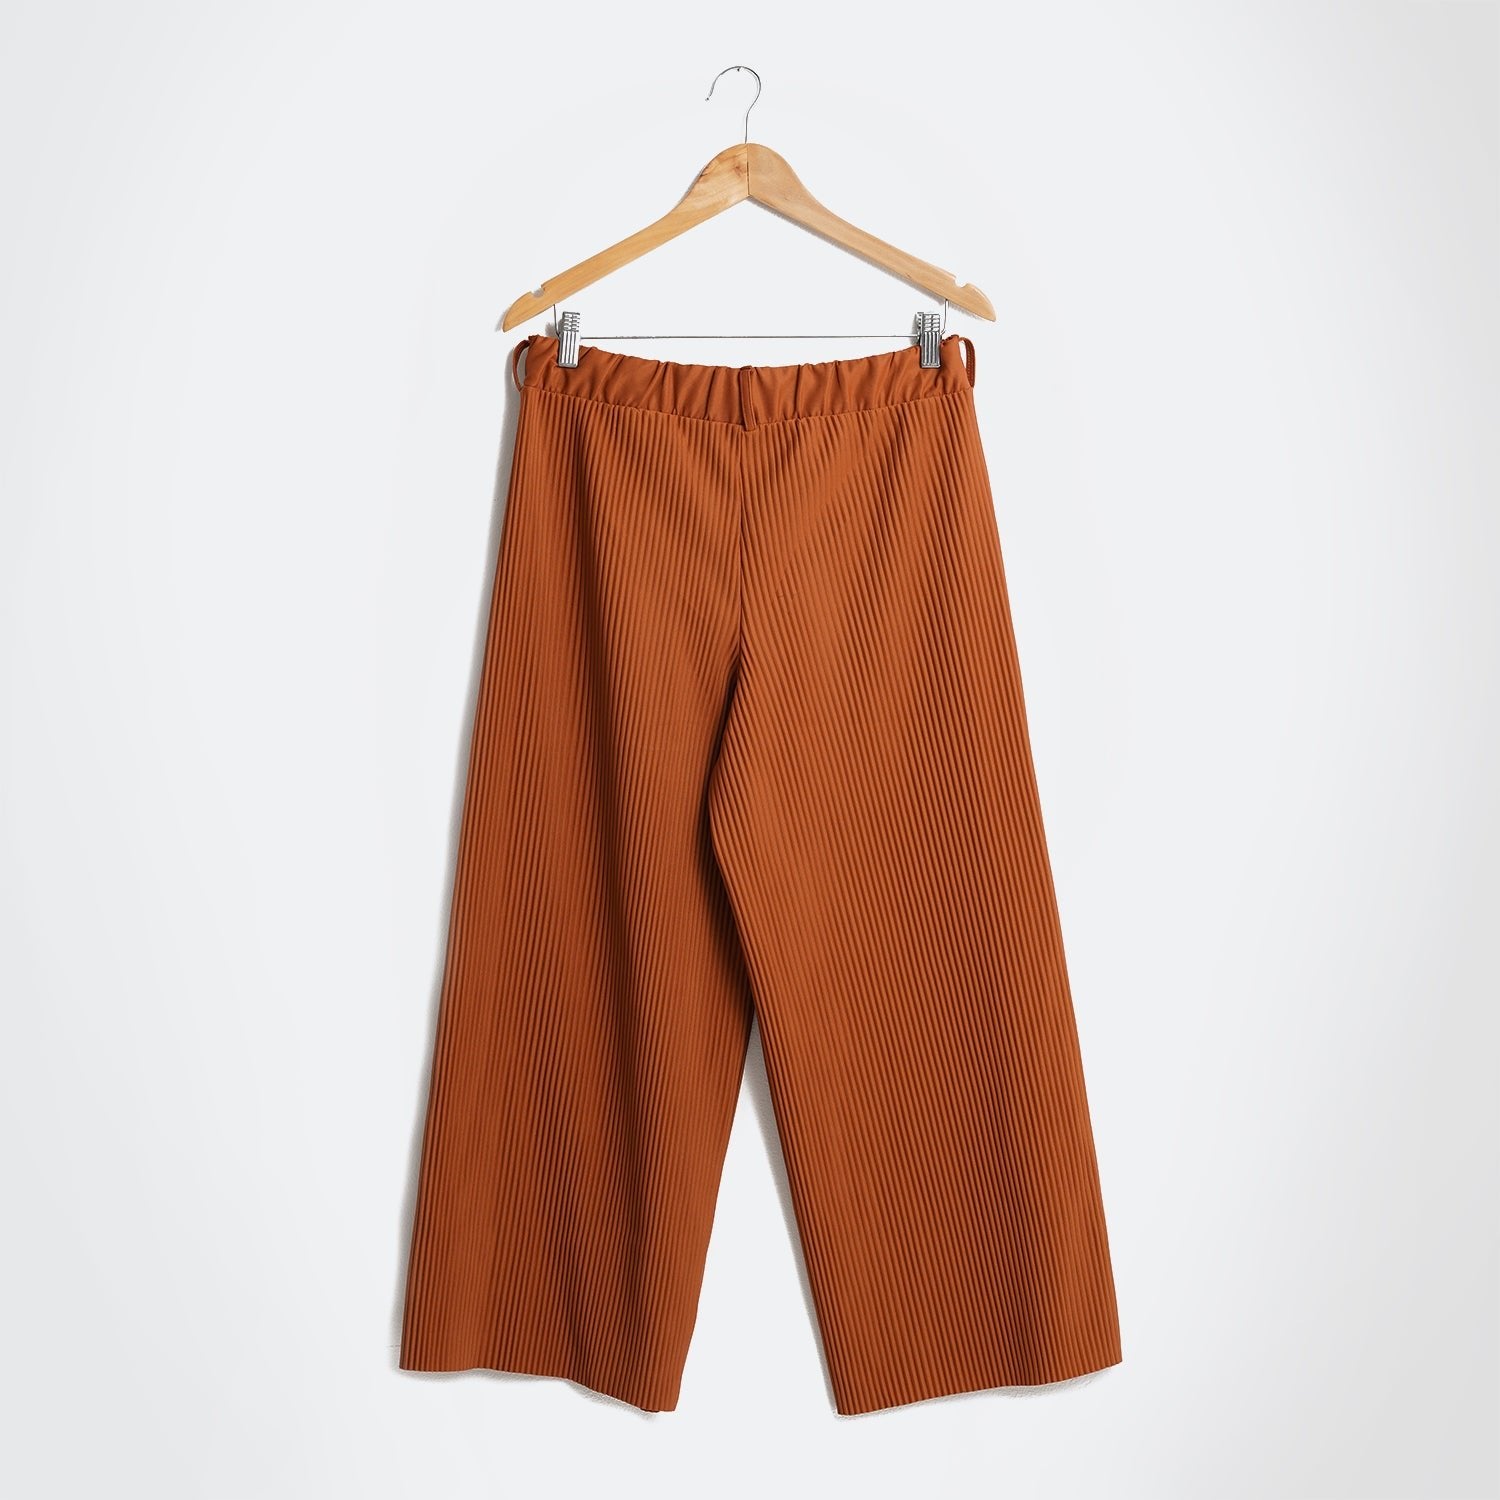 Orsay Relaxed fit pants - Marca Deals - Orsay